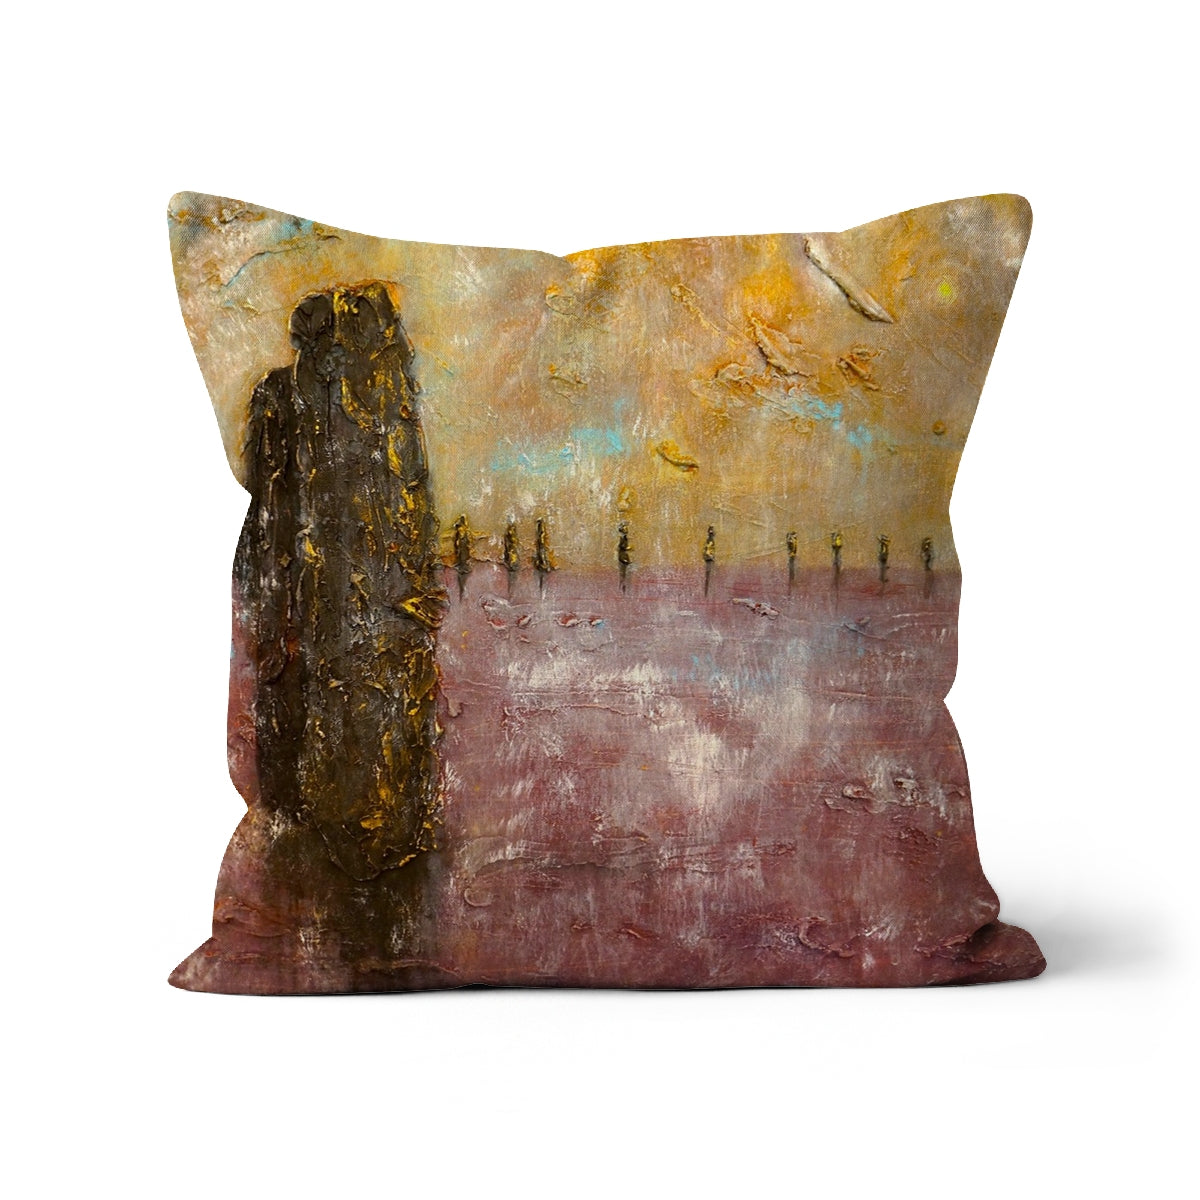 Brodgar Mist Orkney Art Gifts Cushion-Cushions-Orkney Art Gallery-Canvas-22"x22"-Paintings, Prints, Homeware, Art Gifts From Scotland By Scottish Artist Kevin Hunter